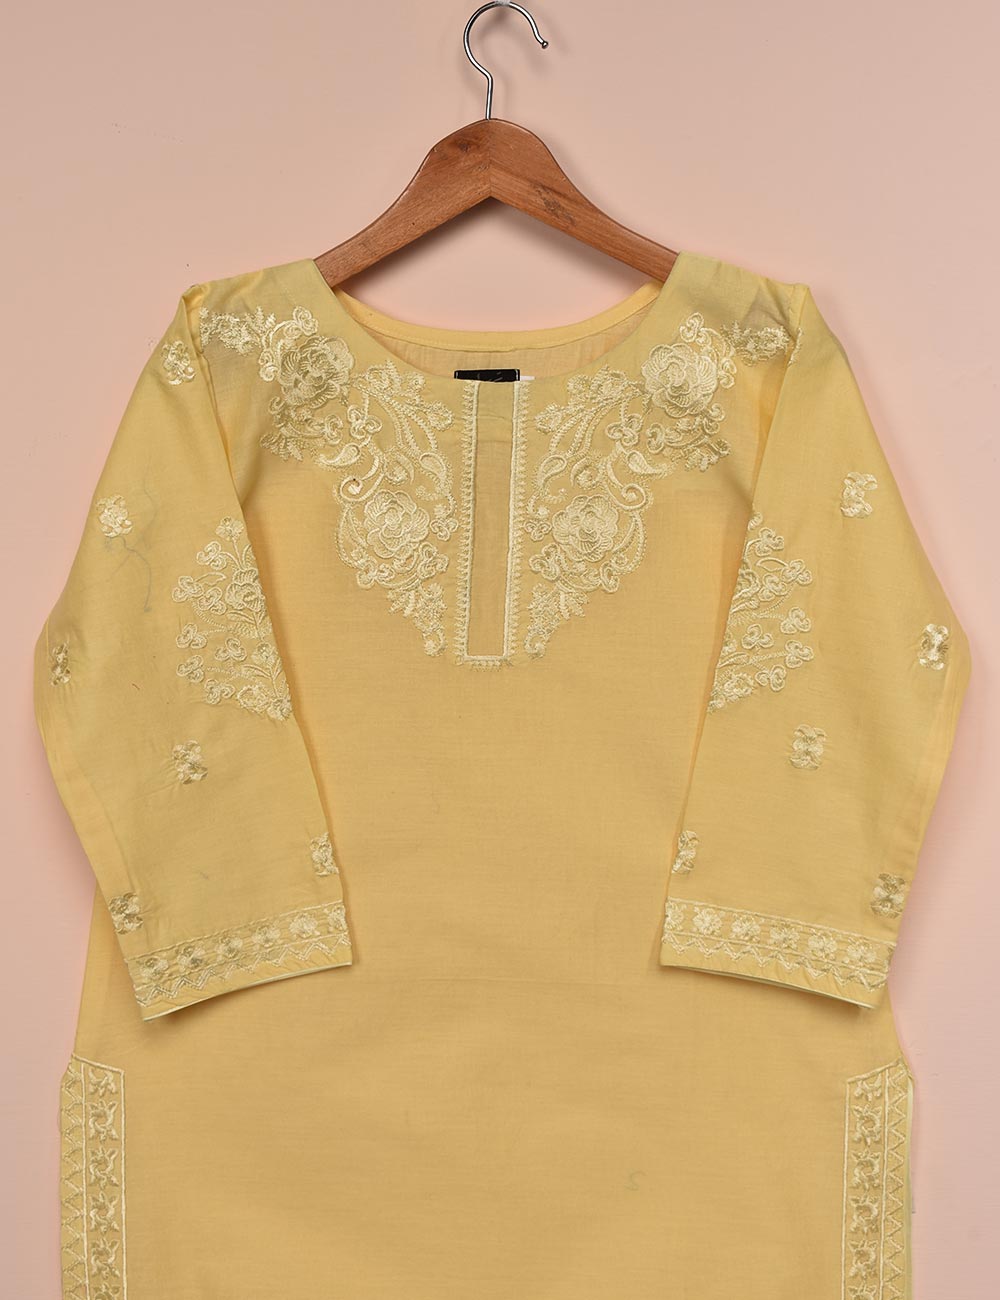 Cotton Embroidered Stitched Kurti - Cosmic Ray (T20-050A-Yellow)